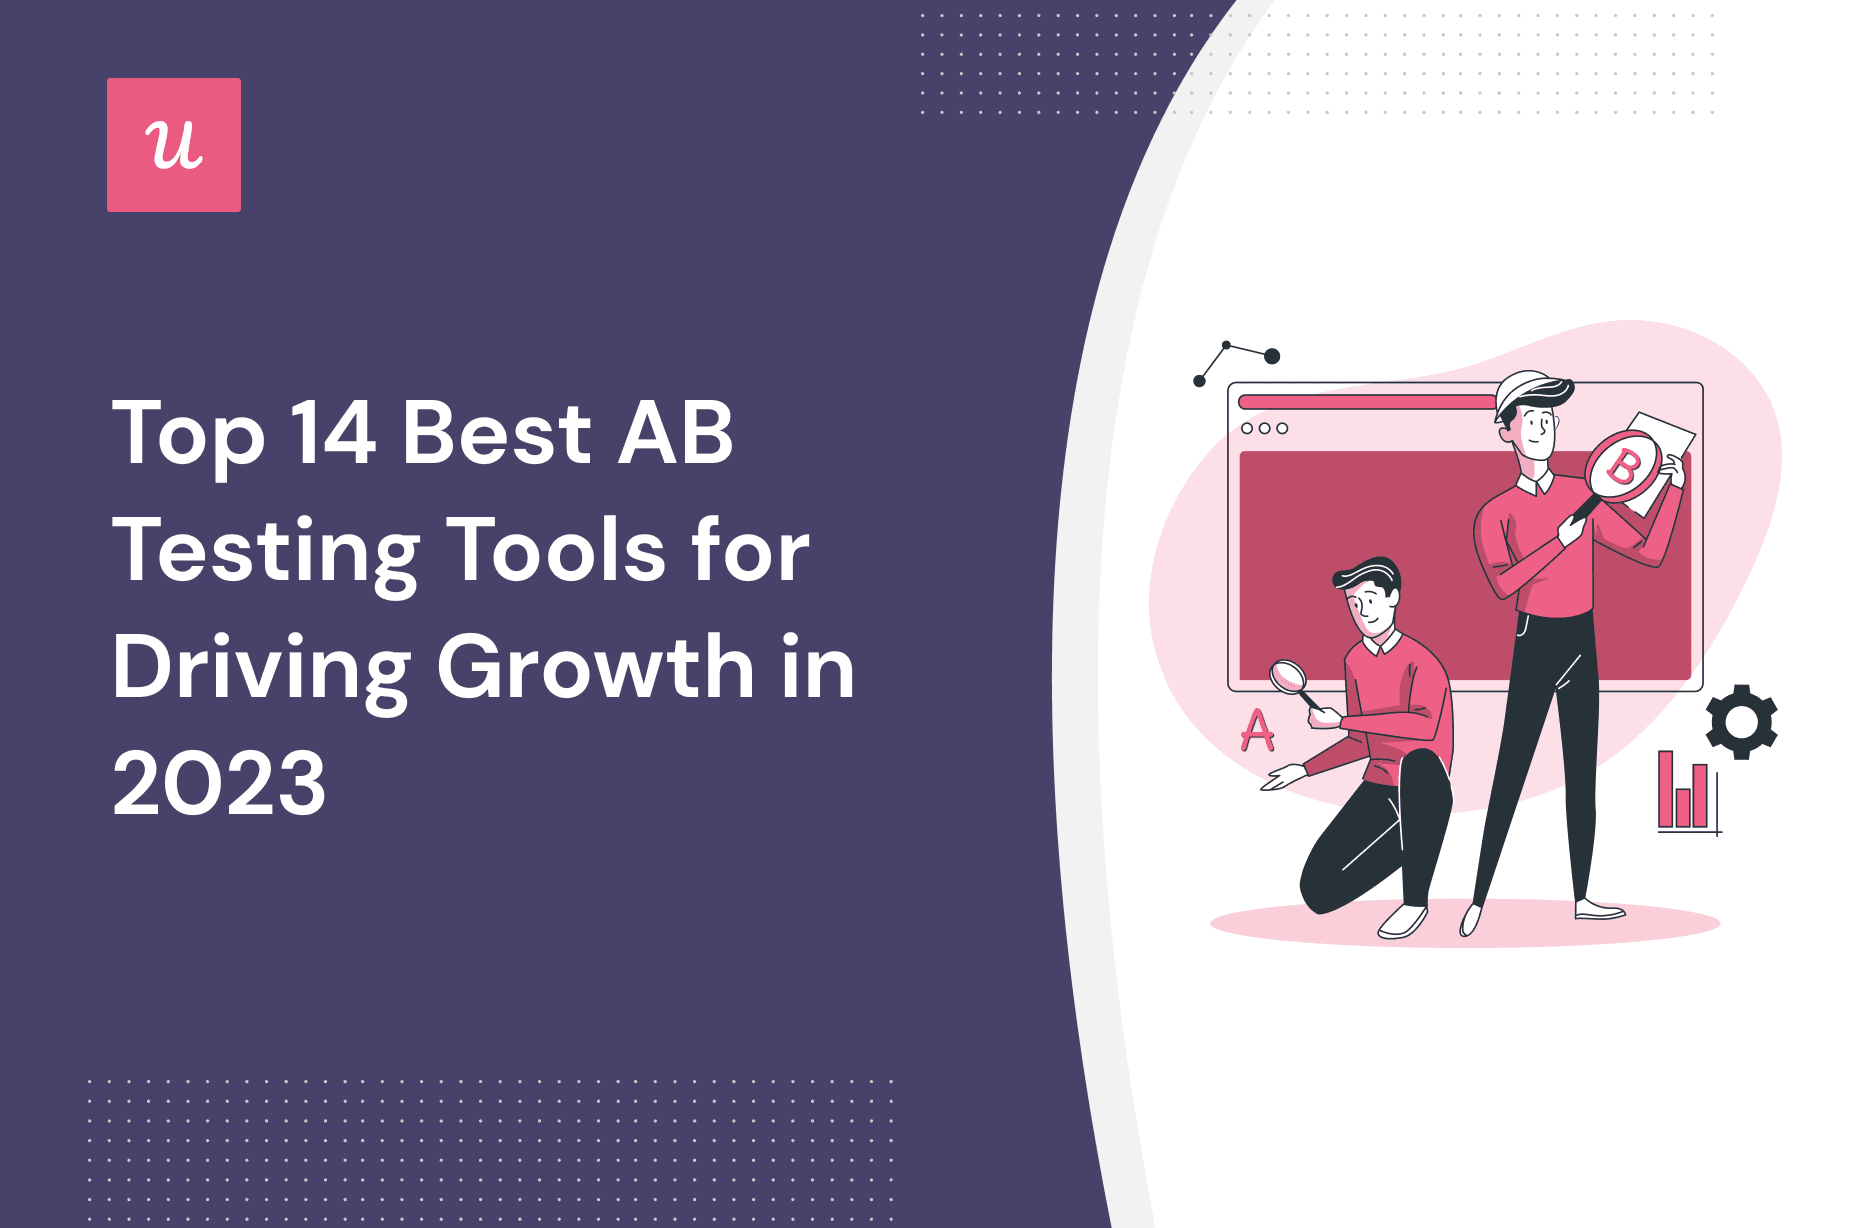 Top 14 Best AB Testing Tools for Driving Growth in 2023 cover